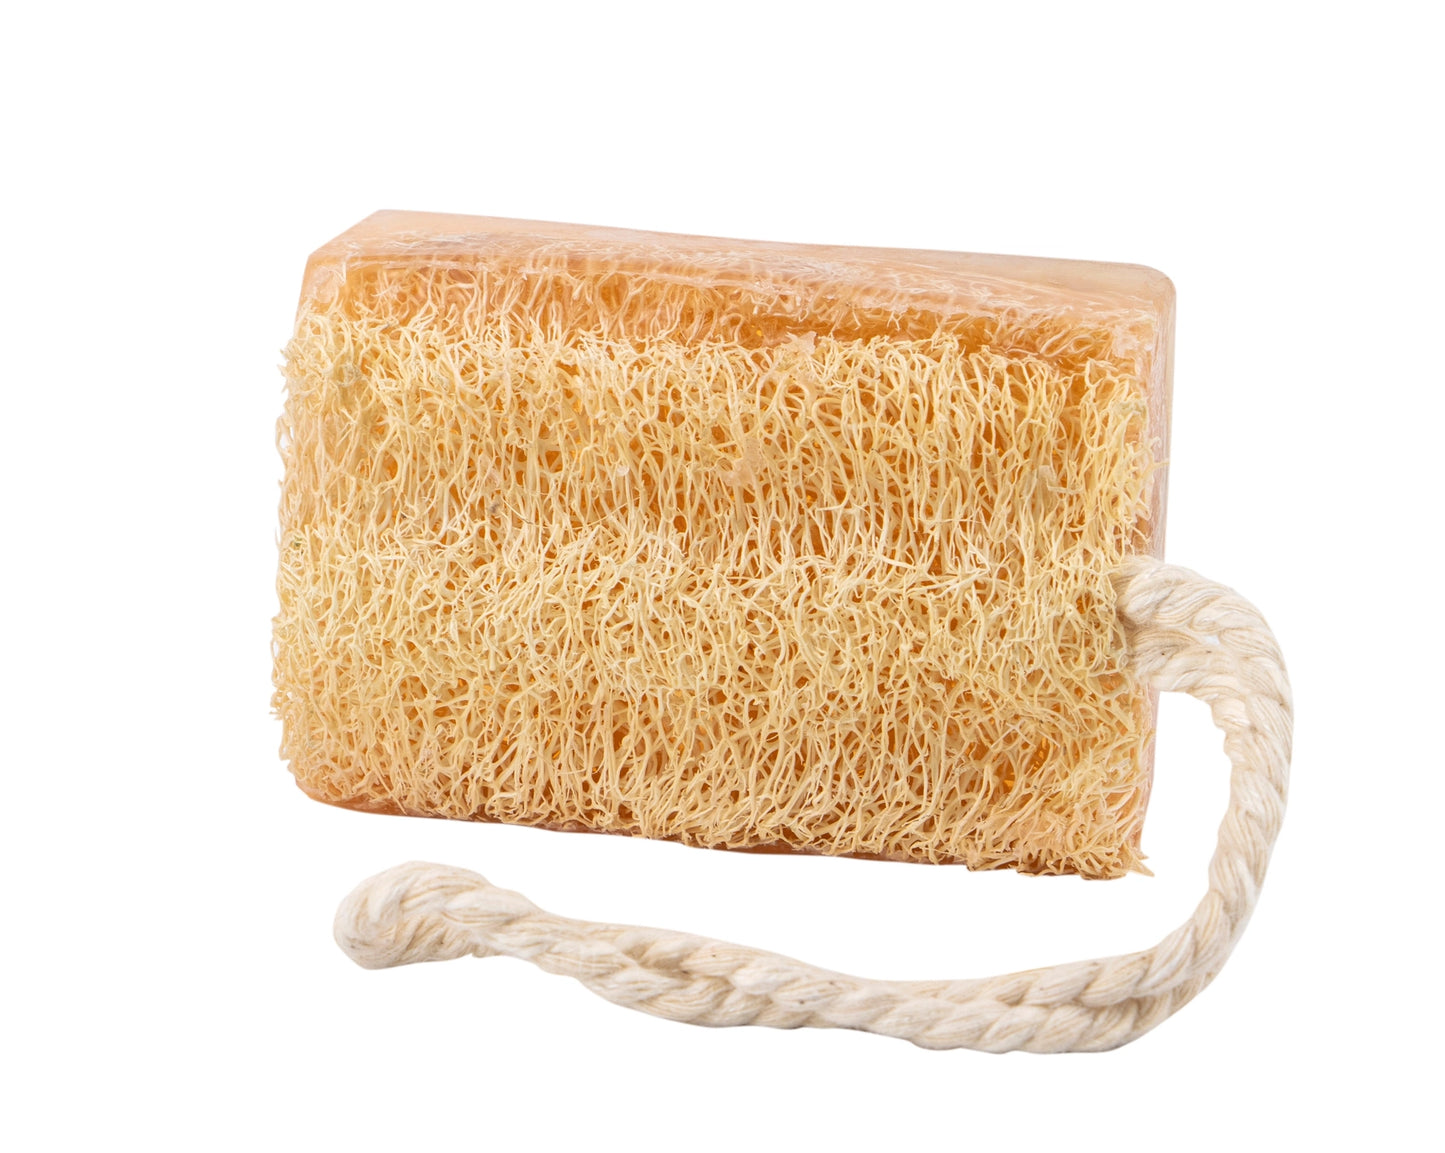 The Soap Factory-Natural Honey & Goat Milk Loofah Soap On A Rope